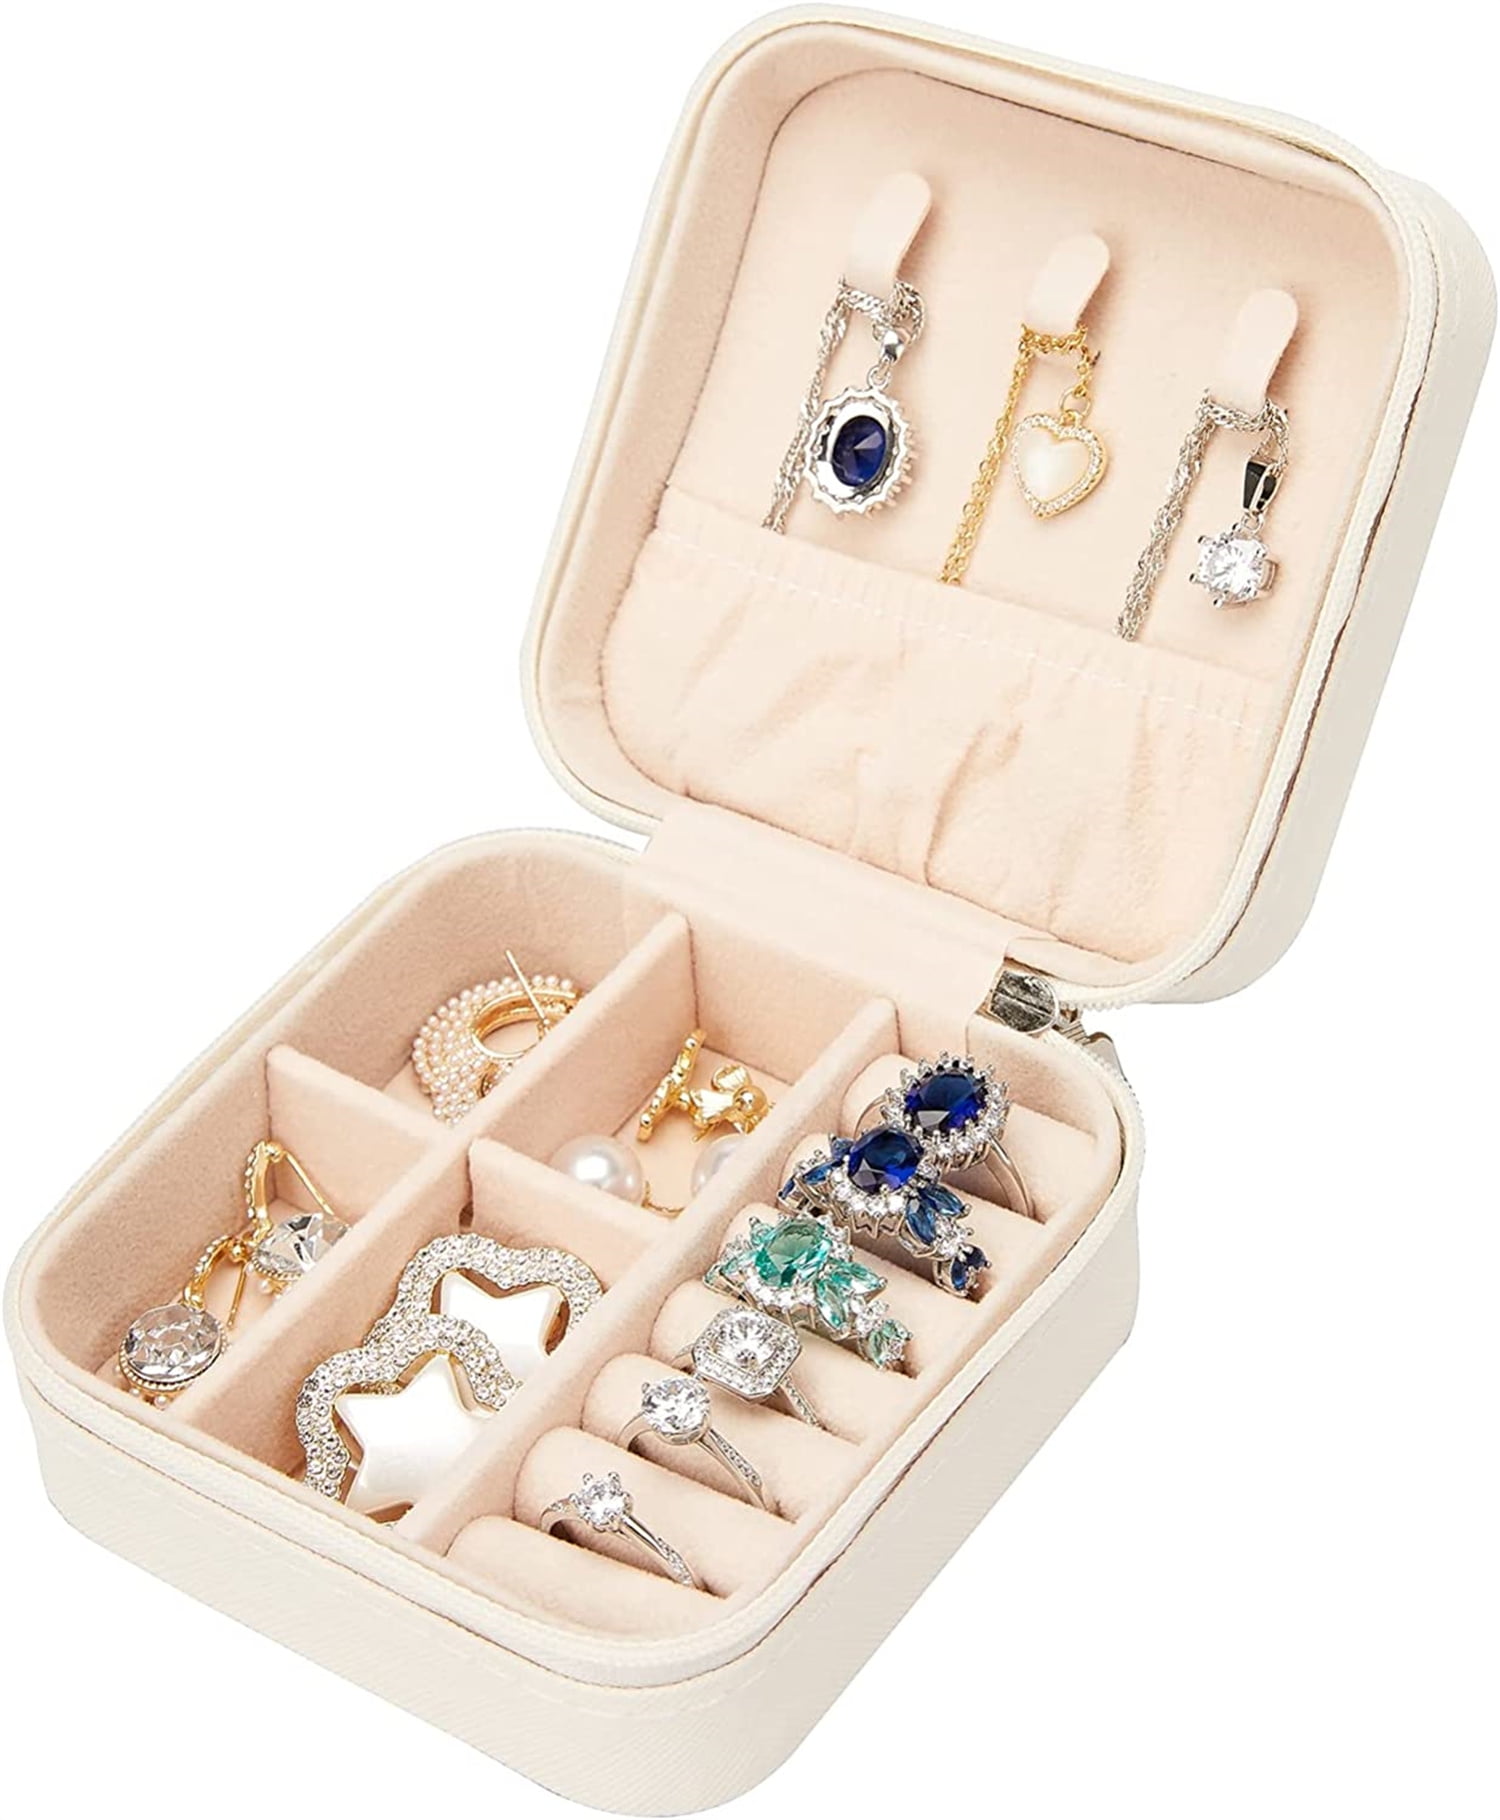 Portable  Travel Jewelry Case For Travel High Quality, Easy To Carry,  And Space Saving Ideal For Rings, Earrings, Necklaces, In Middle & Mini  Sizes From Ifashionjewelry, $15.29